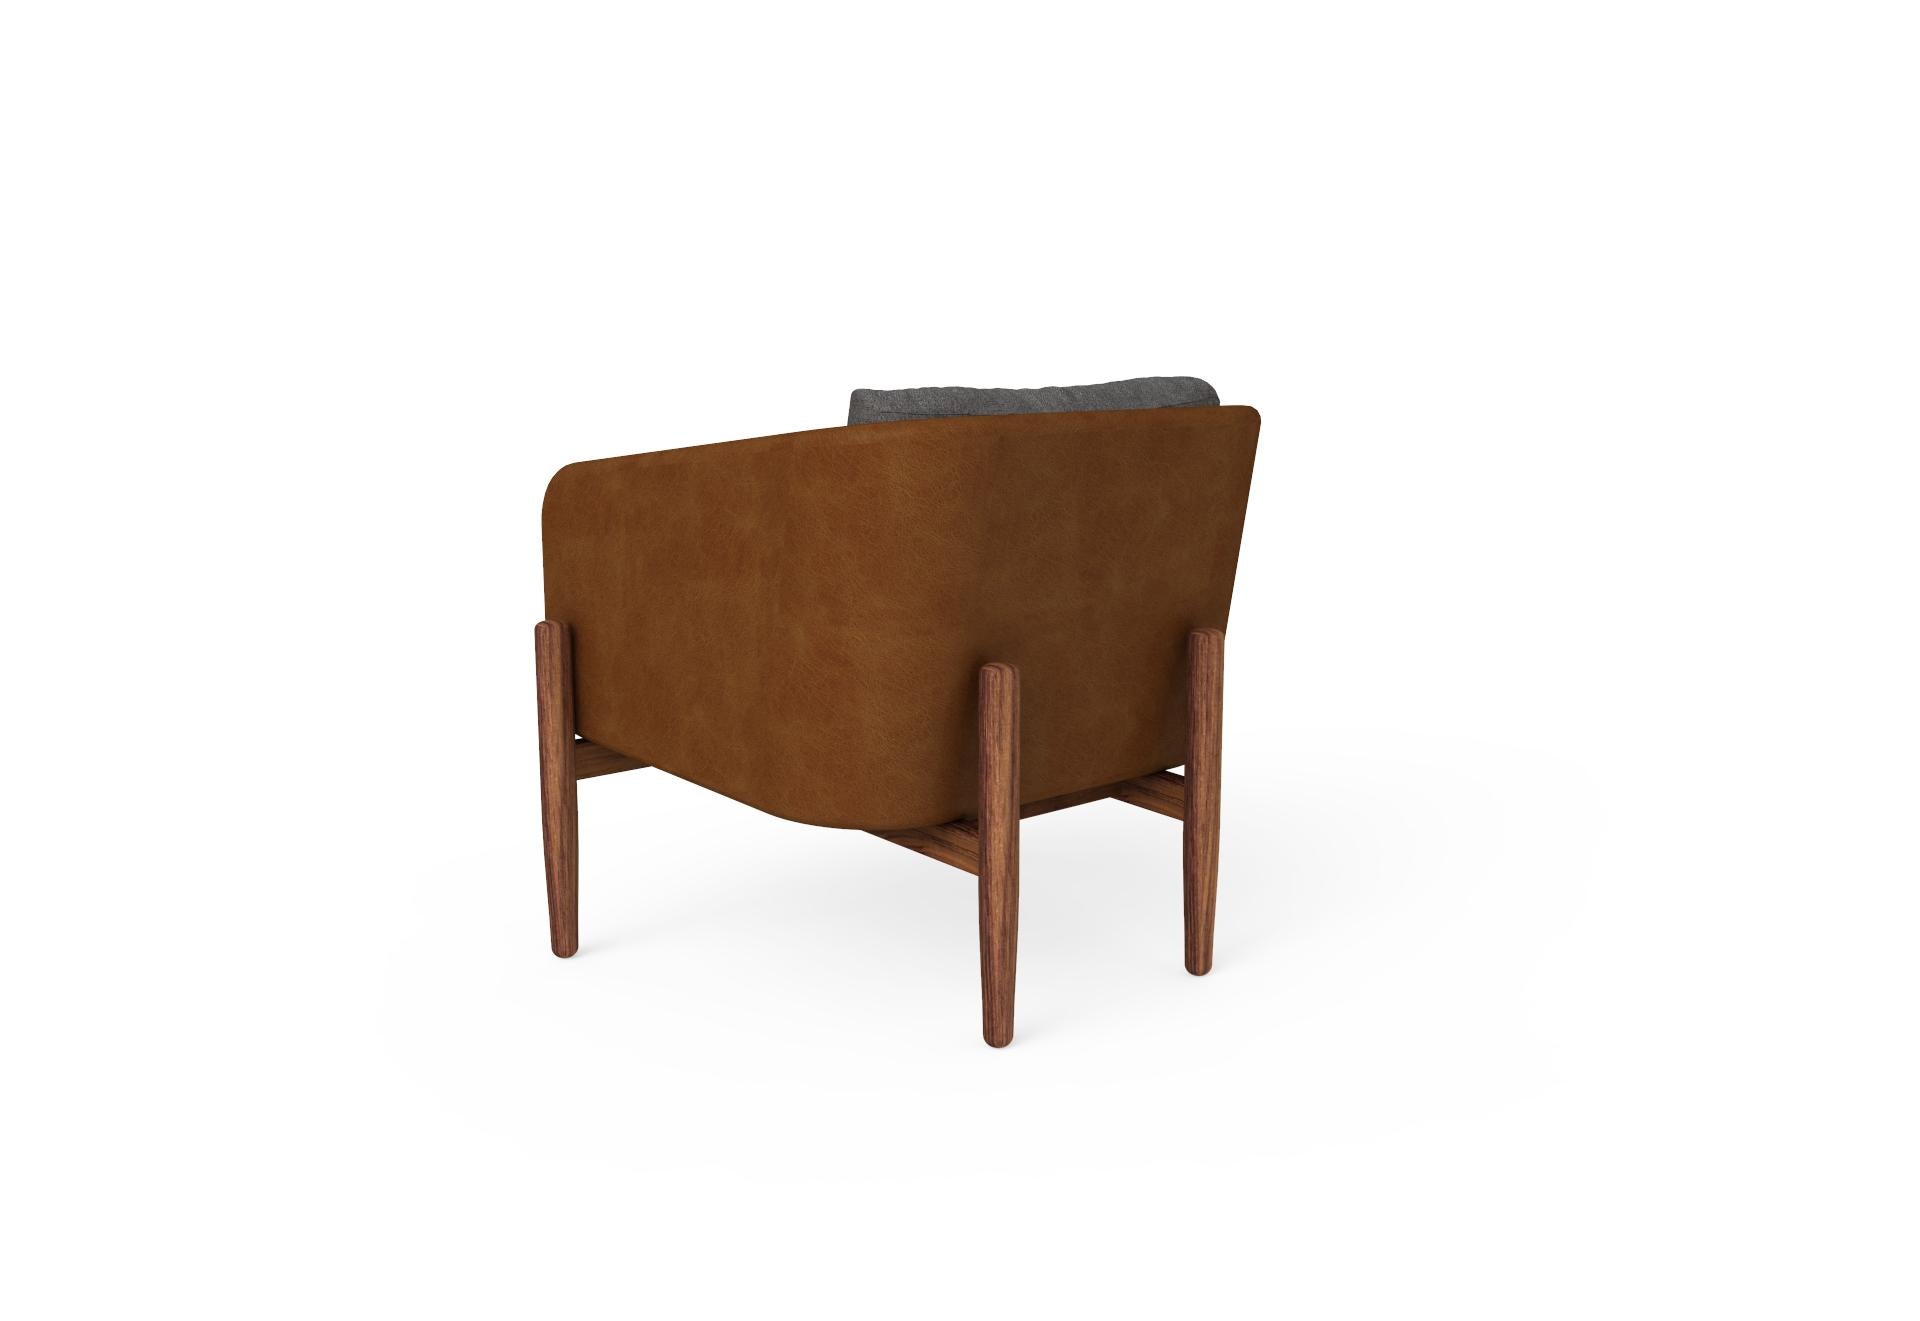 Modern Guerrero Armchair, Leather and Dark Tropical Wood, Contemporary Mexican Design For Sale